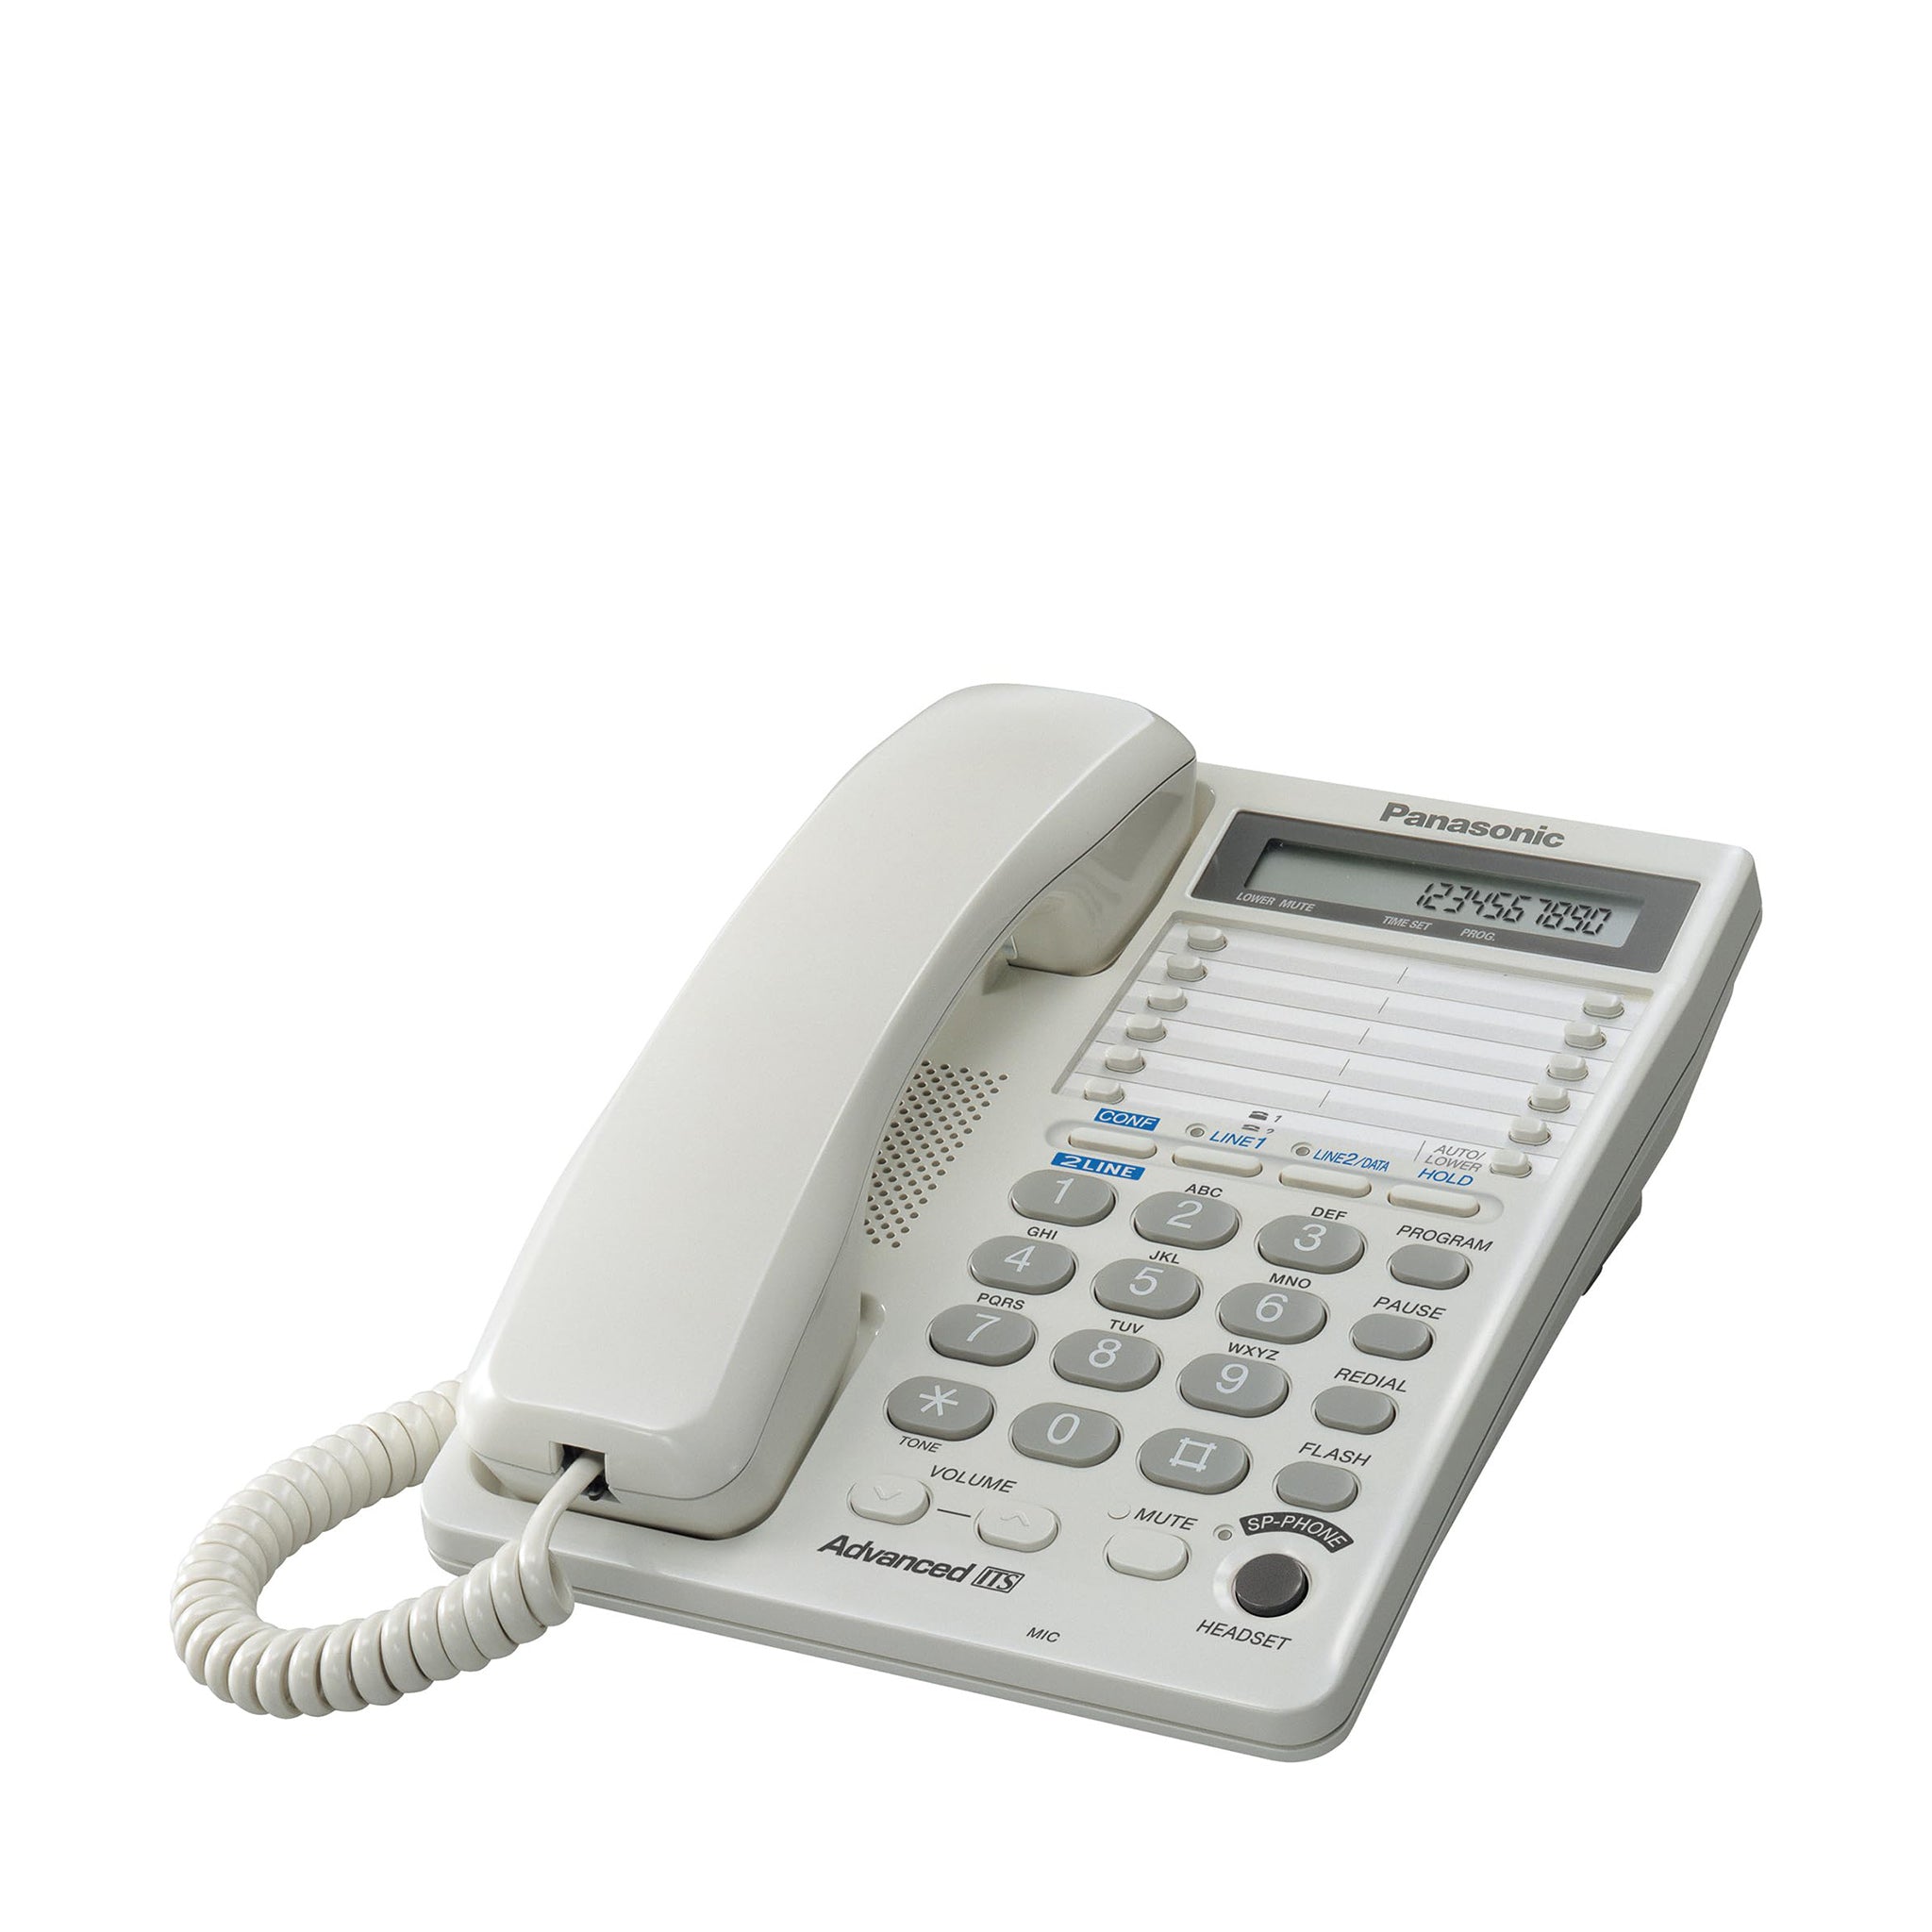 Digital Corded System Corded Machine Phone Link2Cell with Panasonic - 2 Handsets, KX-TGF382M Answering